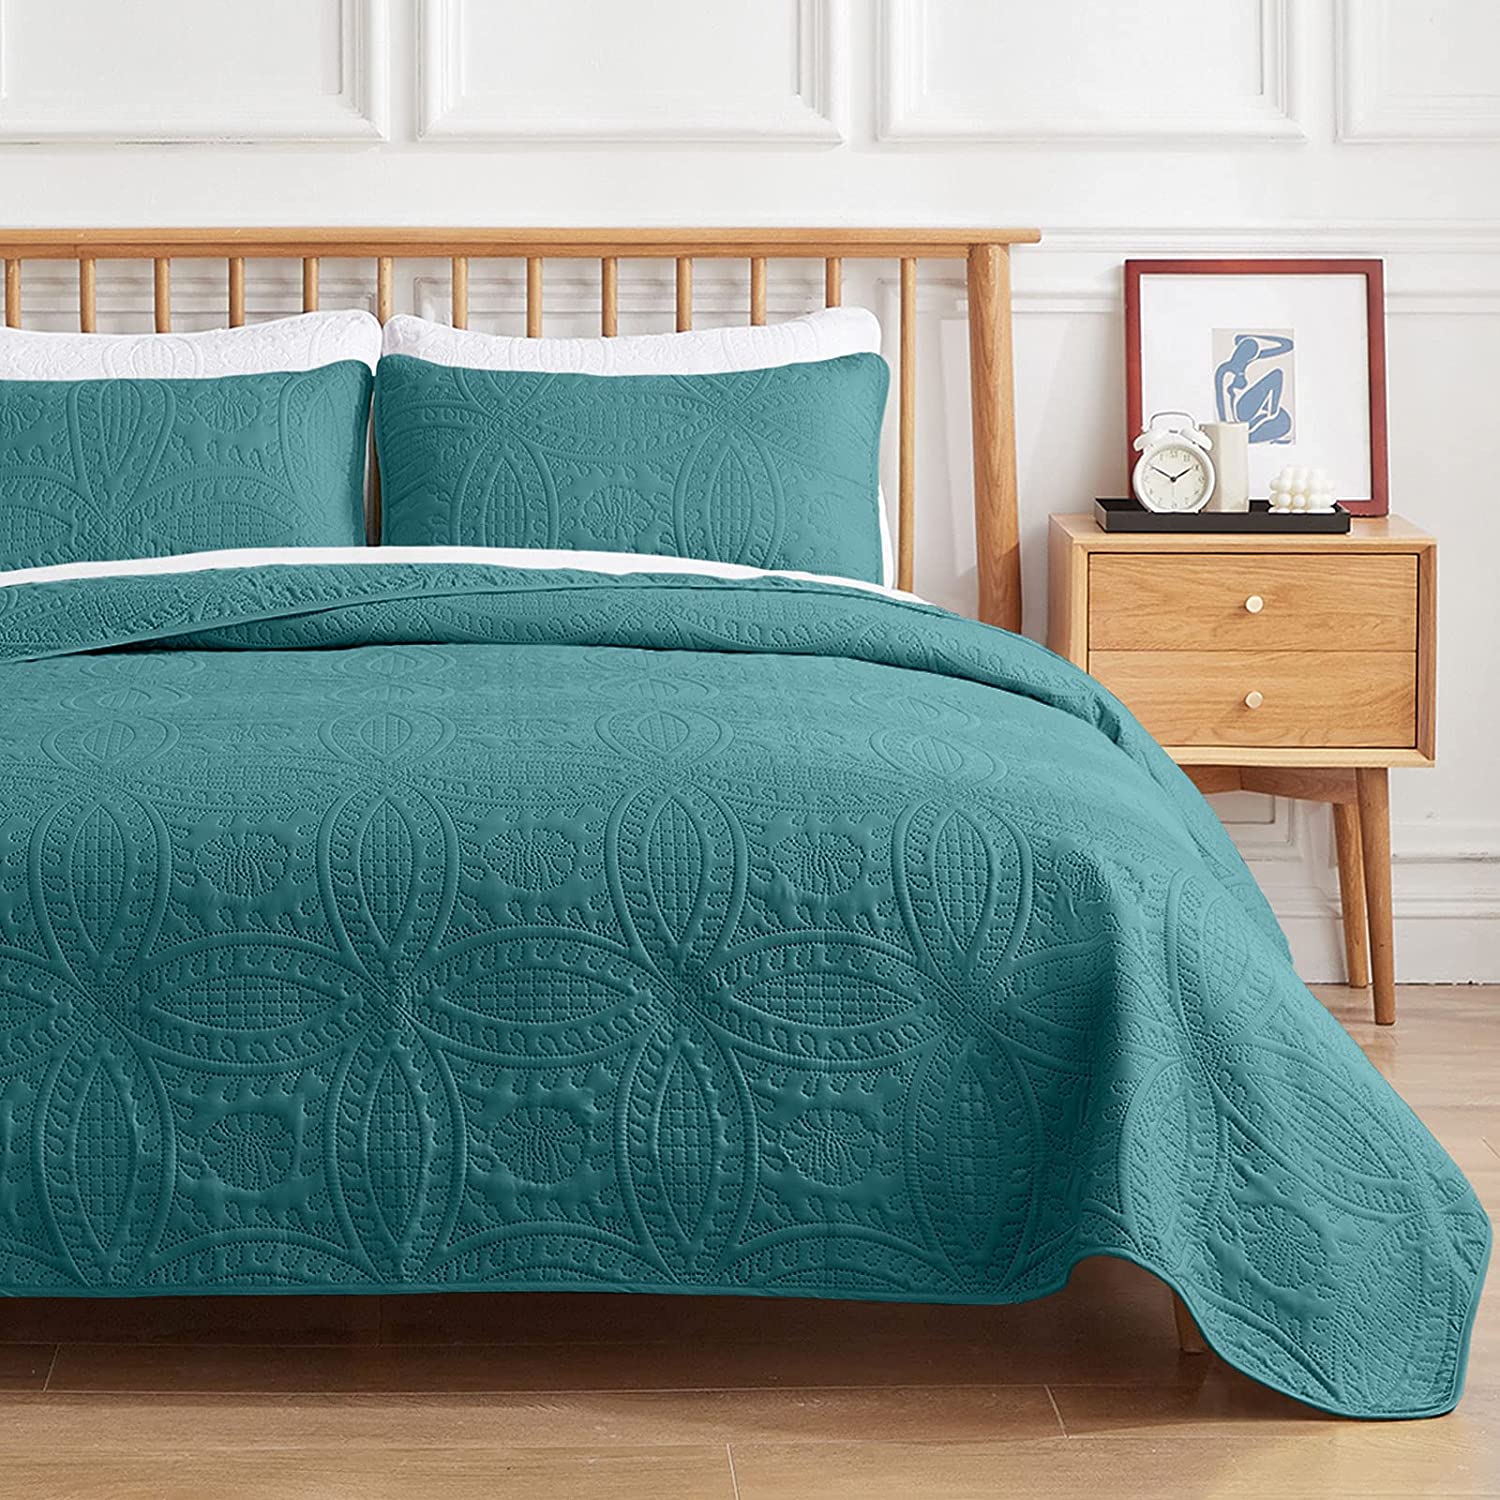 VEEYOO 2 Pieces Bedspread Twin Size - Ultrasonic Embossing Lightweight Quilt Set, Soft Microfiber Reversible Coverlet for All Seasons (Teal, 1 Bedspread, 1 Sham) Size Twin